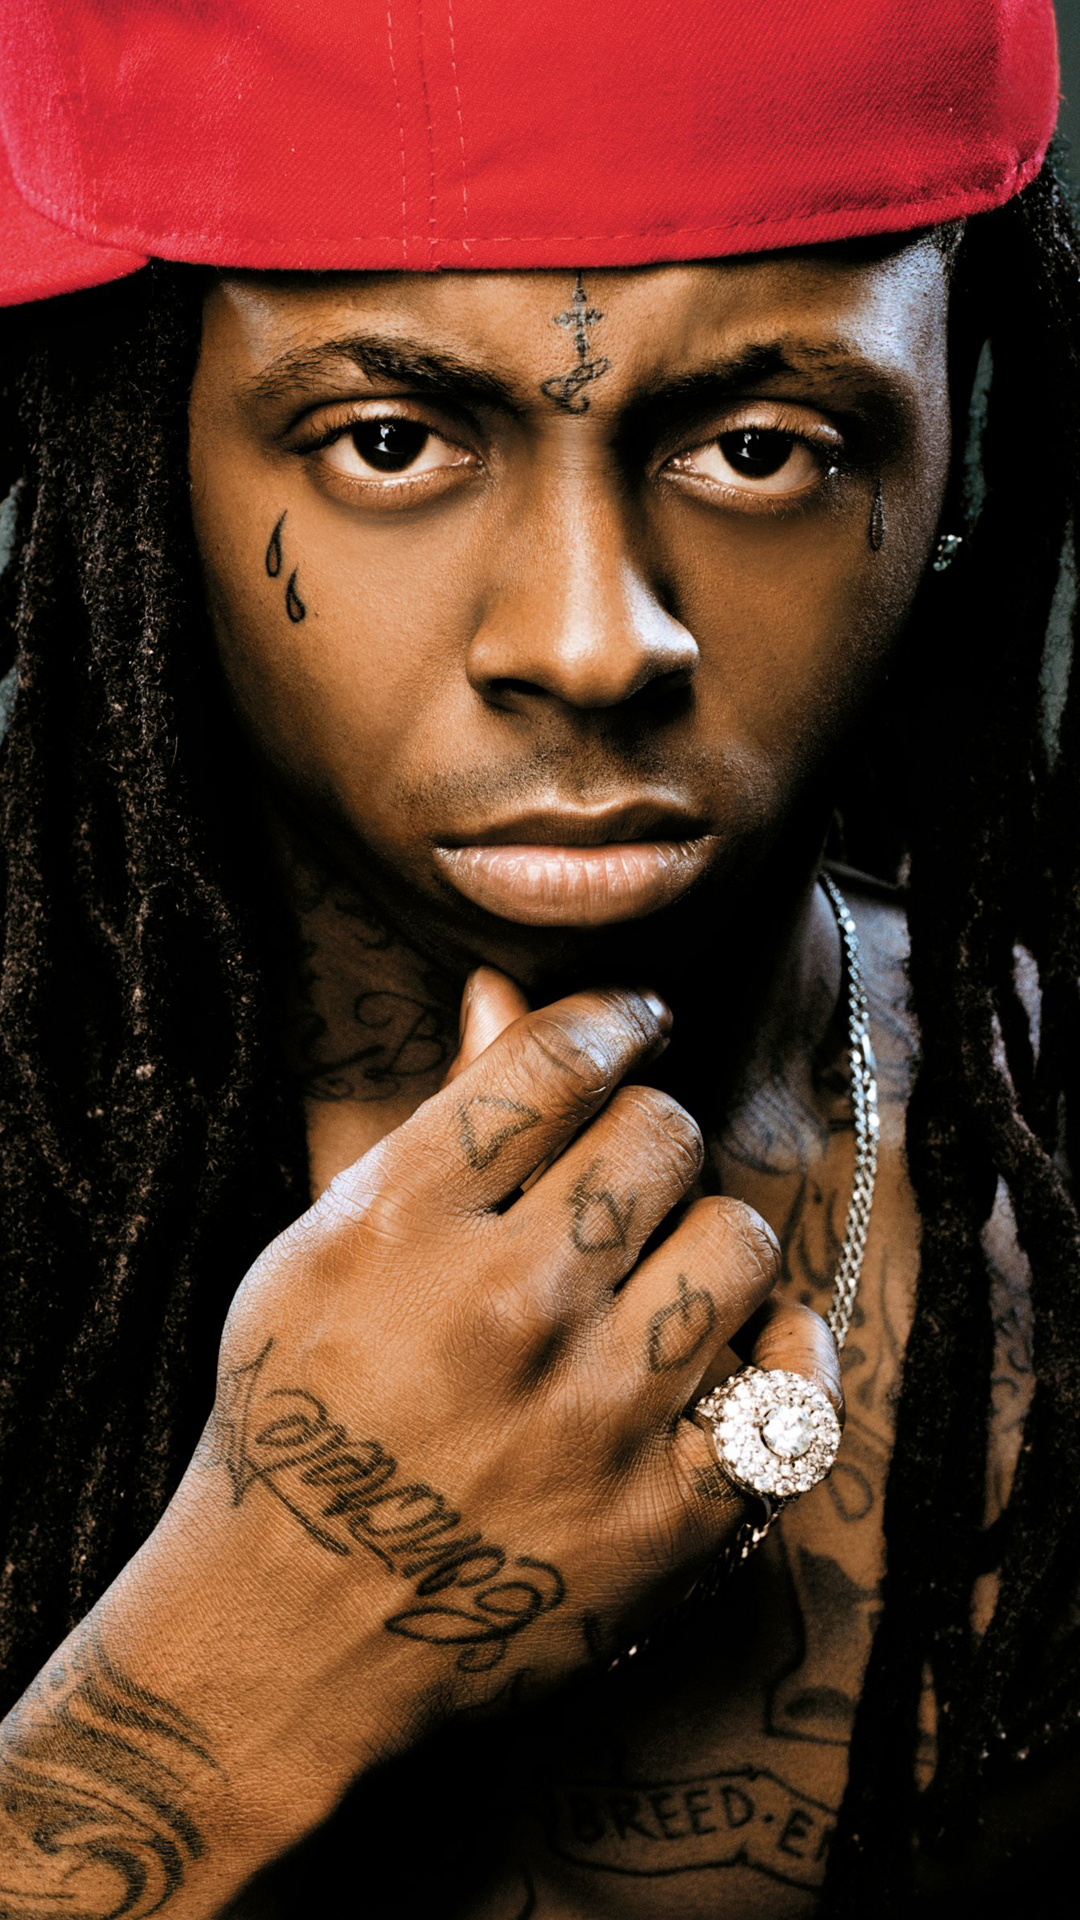 Lil Wayne htc one wallpaper, free and easy to download